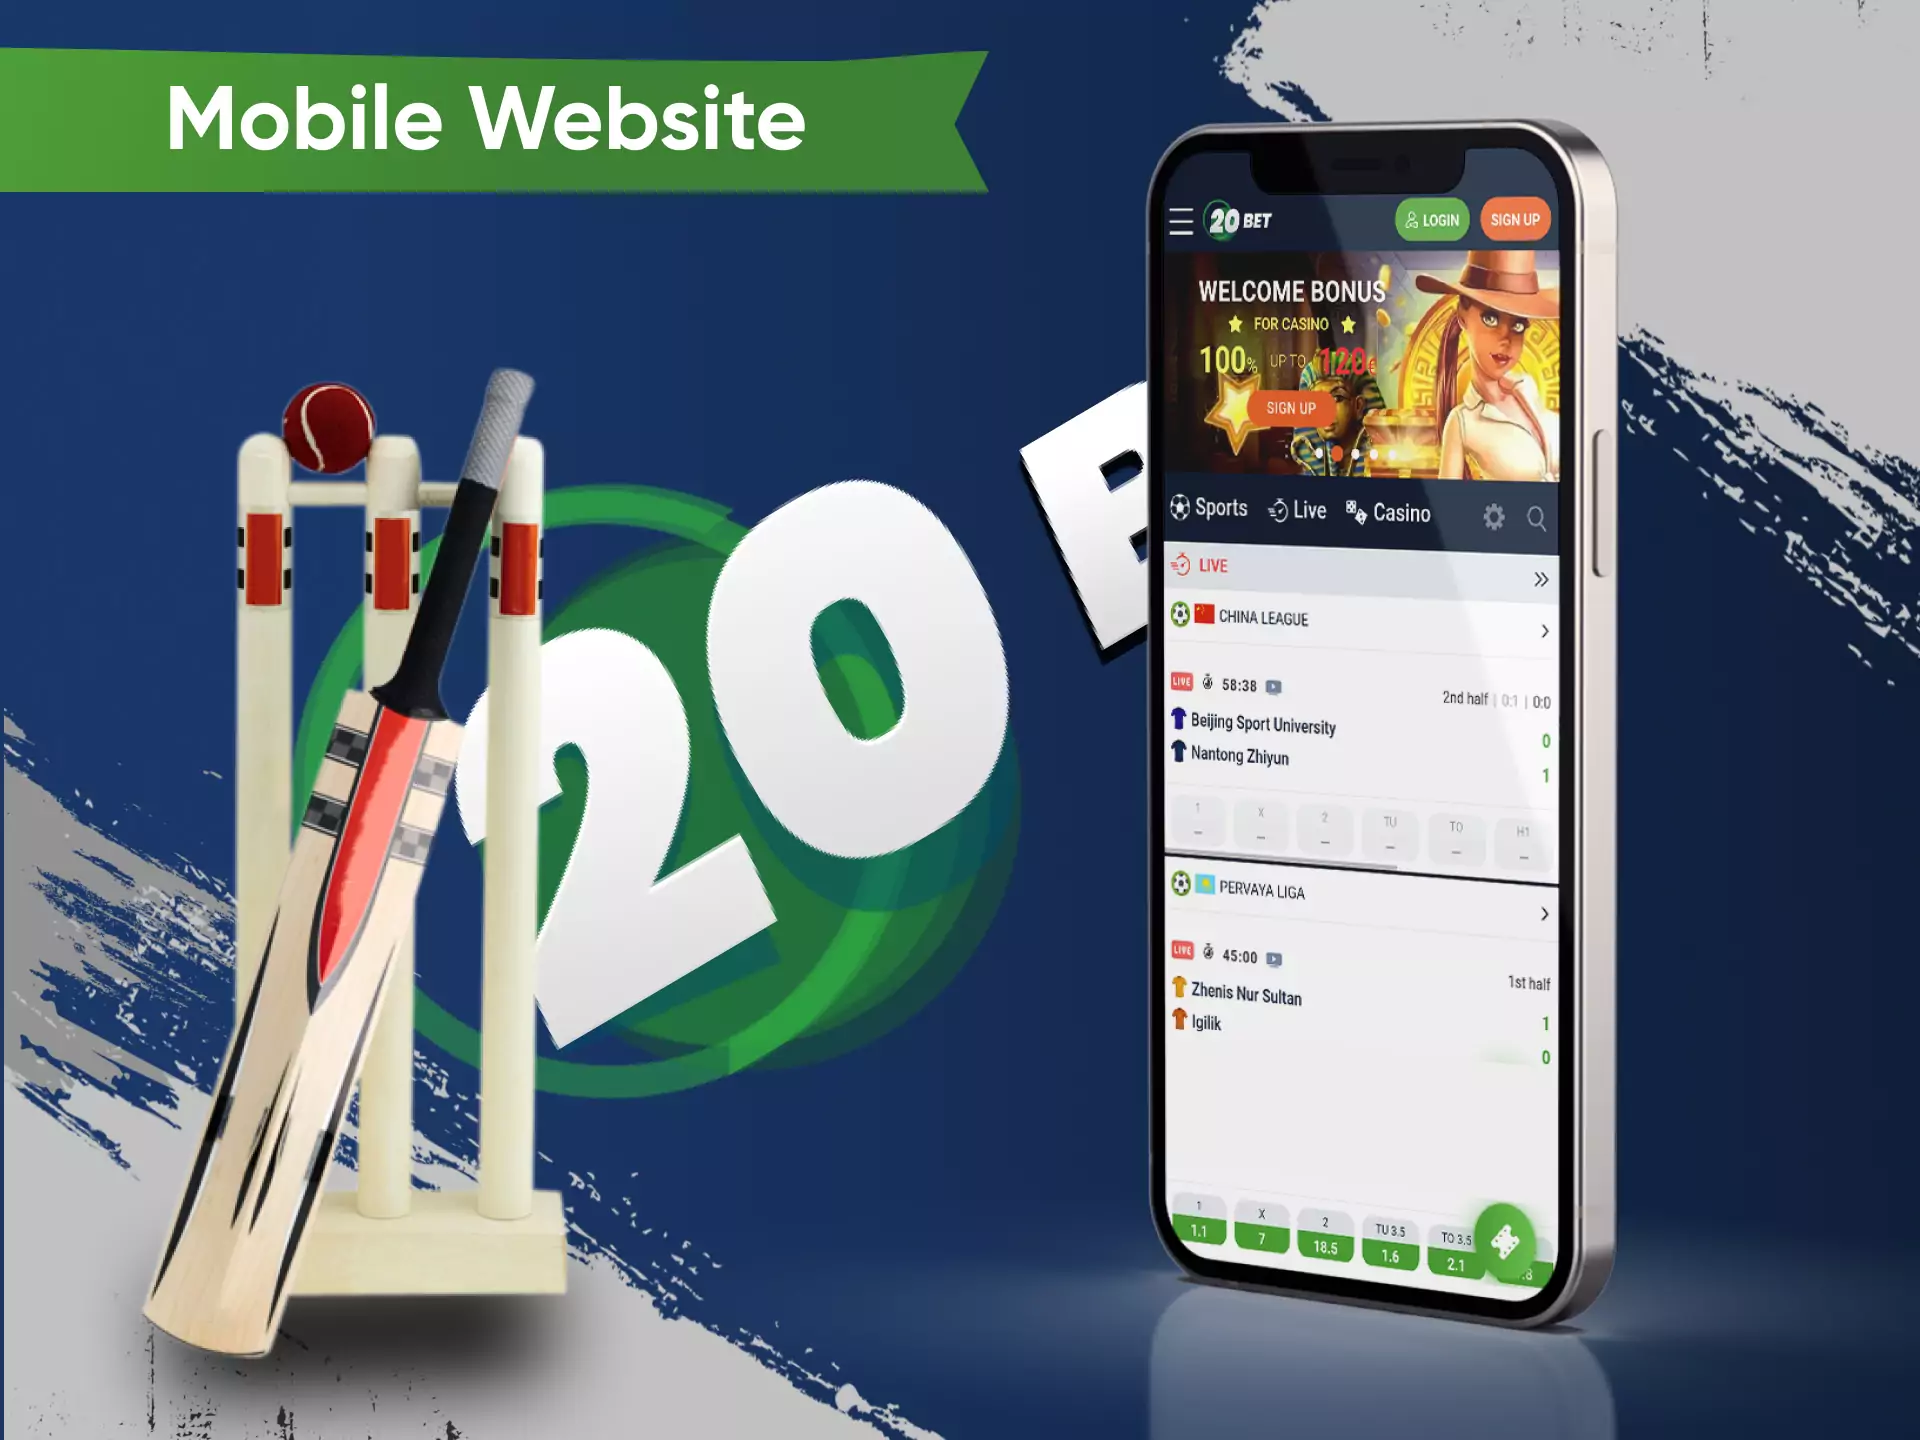 The mobile website of 20bet works great on any device.